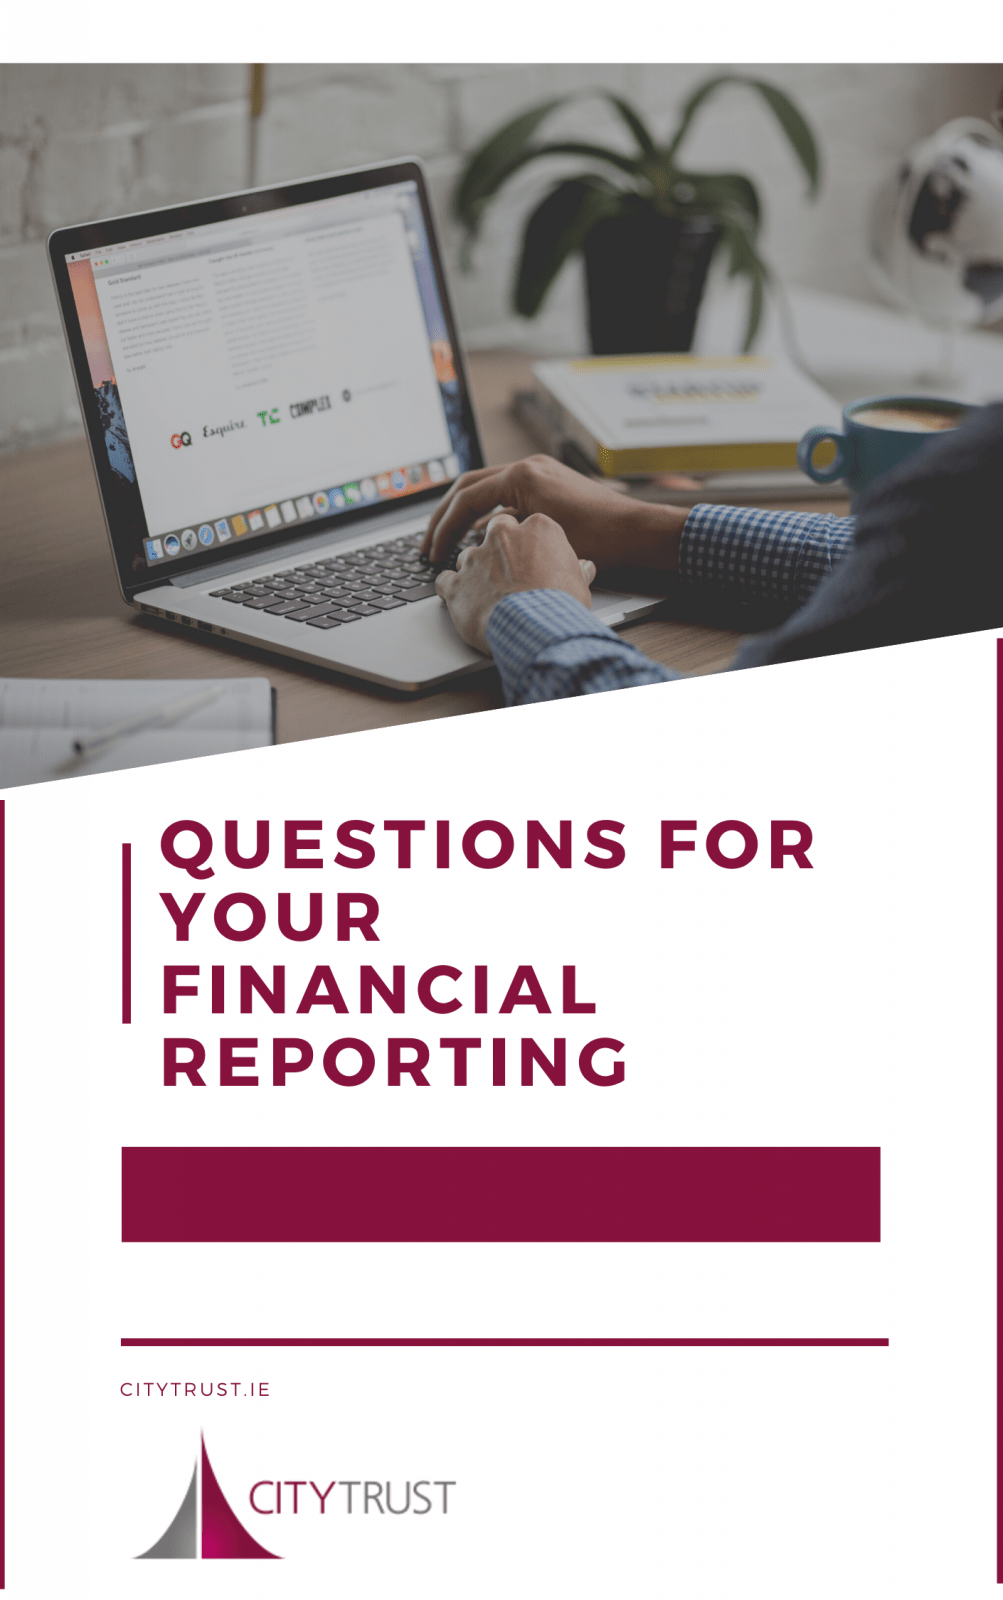 Questions for your financial reporting